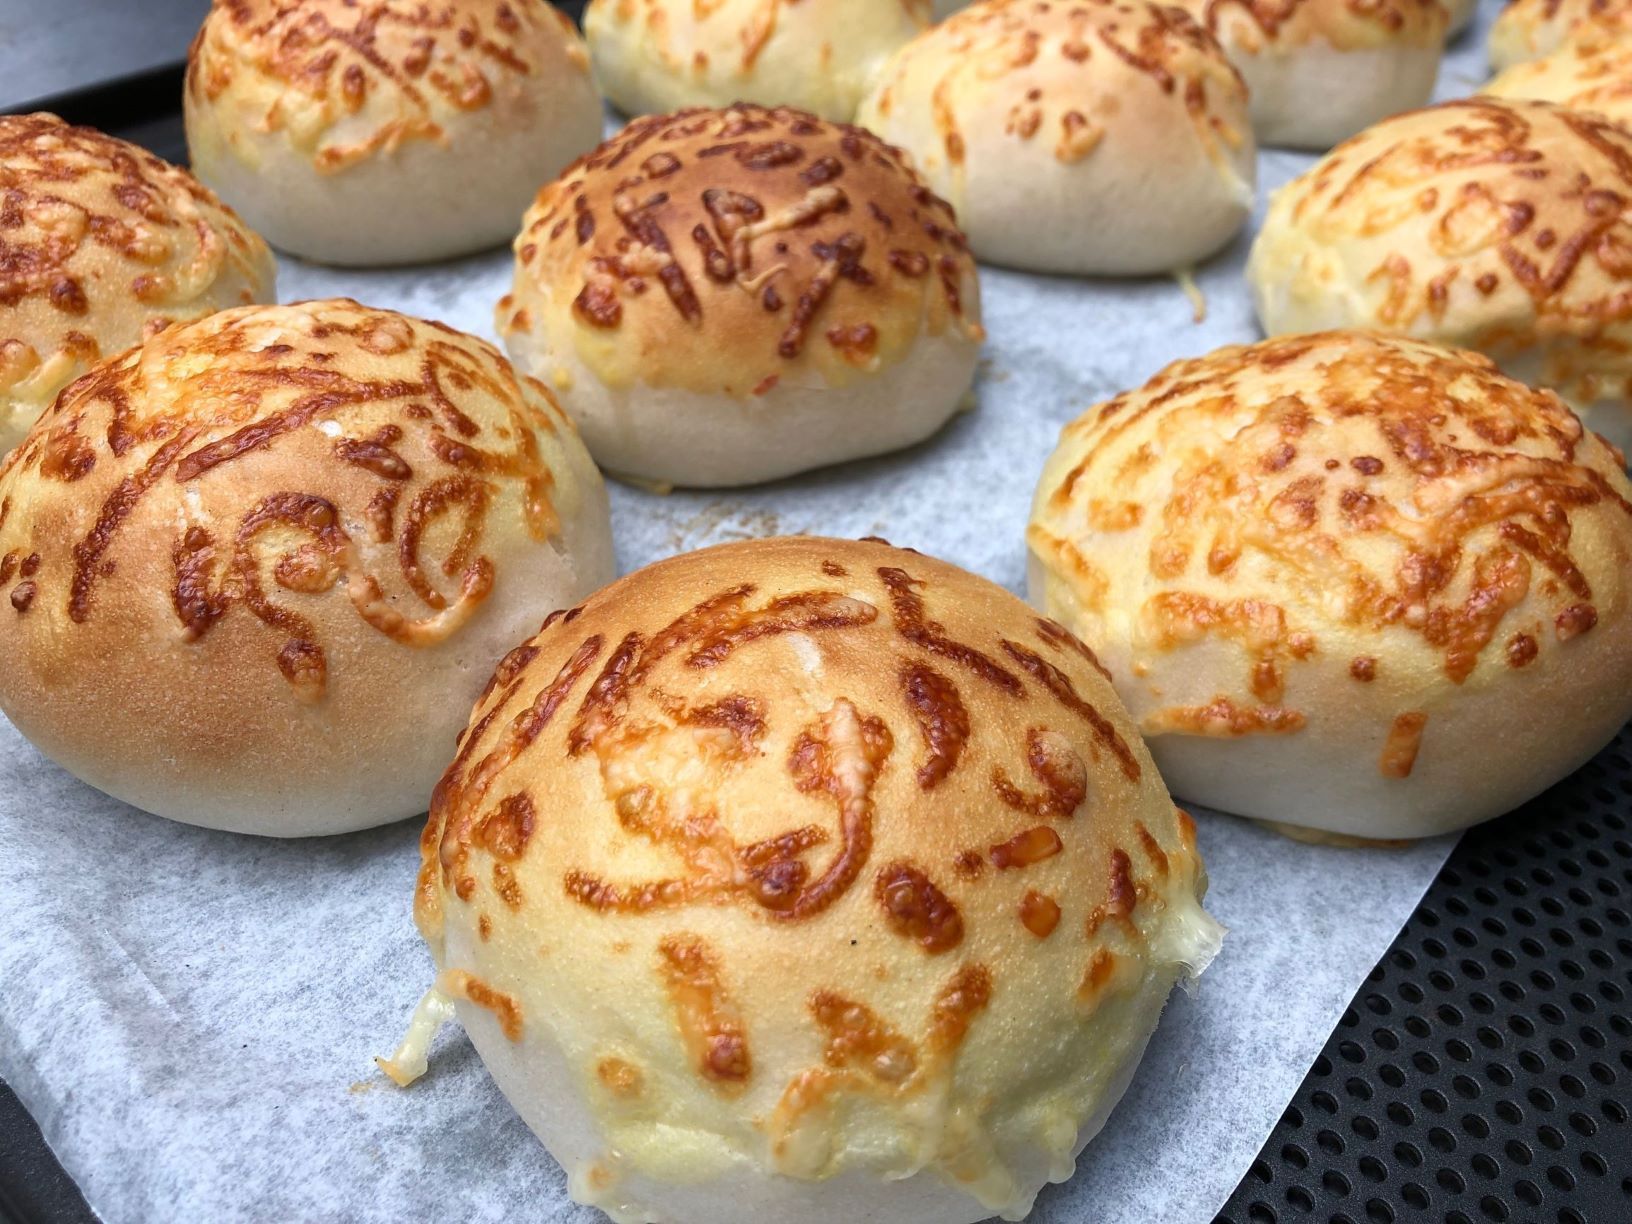 Buns covered with cheese by FoodJet cheese depositor